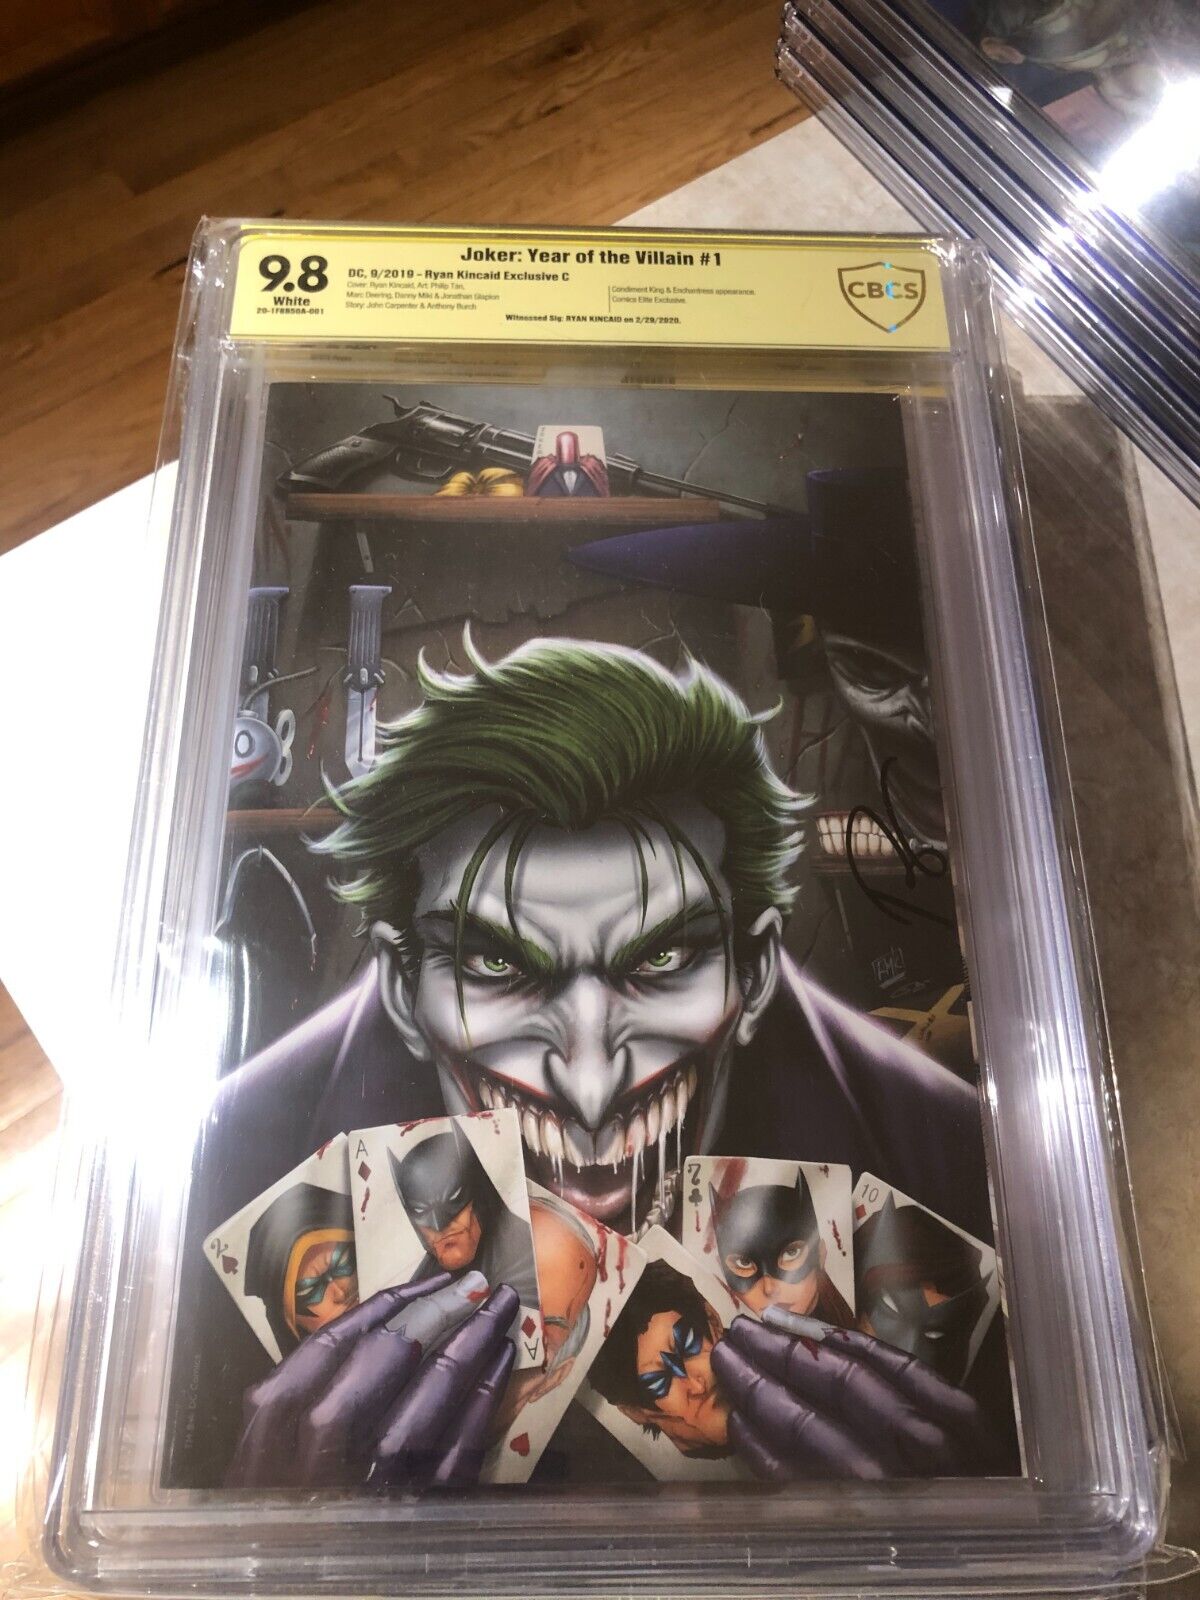 Joker: Year of the Villain #1 - CBCS 9.8 Graded - Ryan Kincaid Signed - CE Excl.